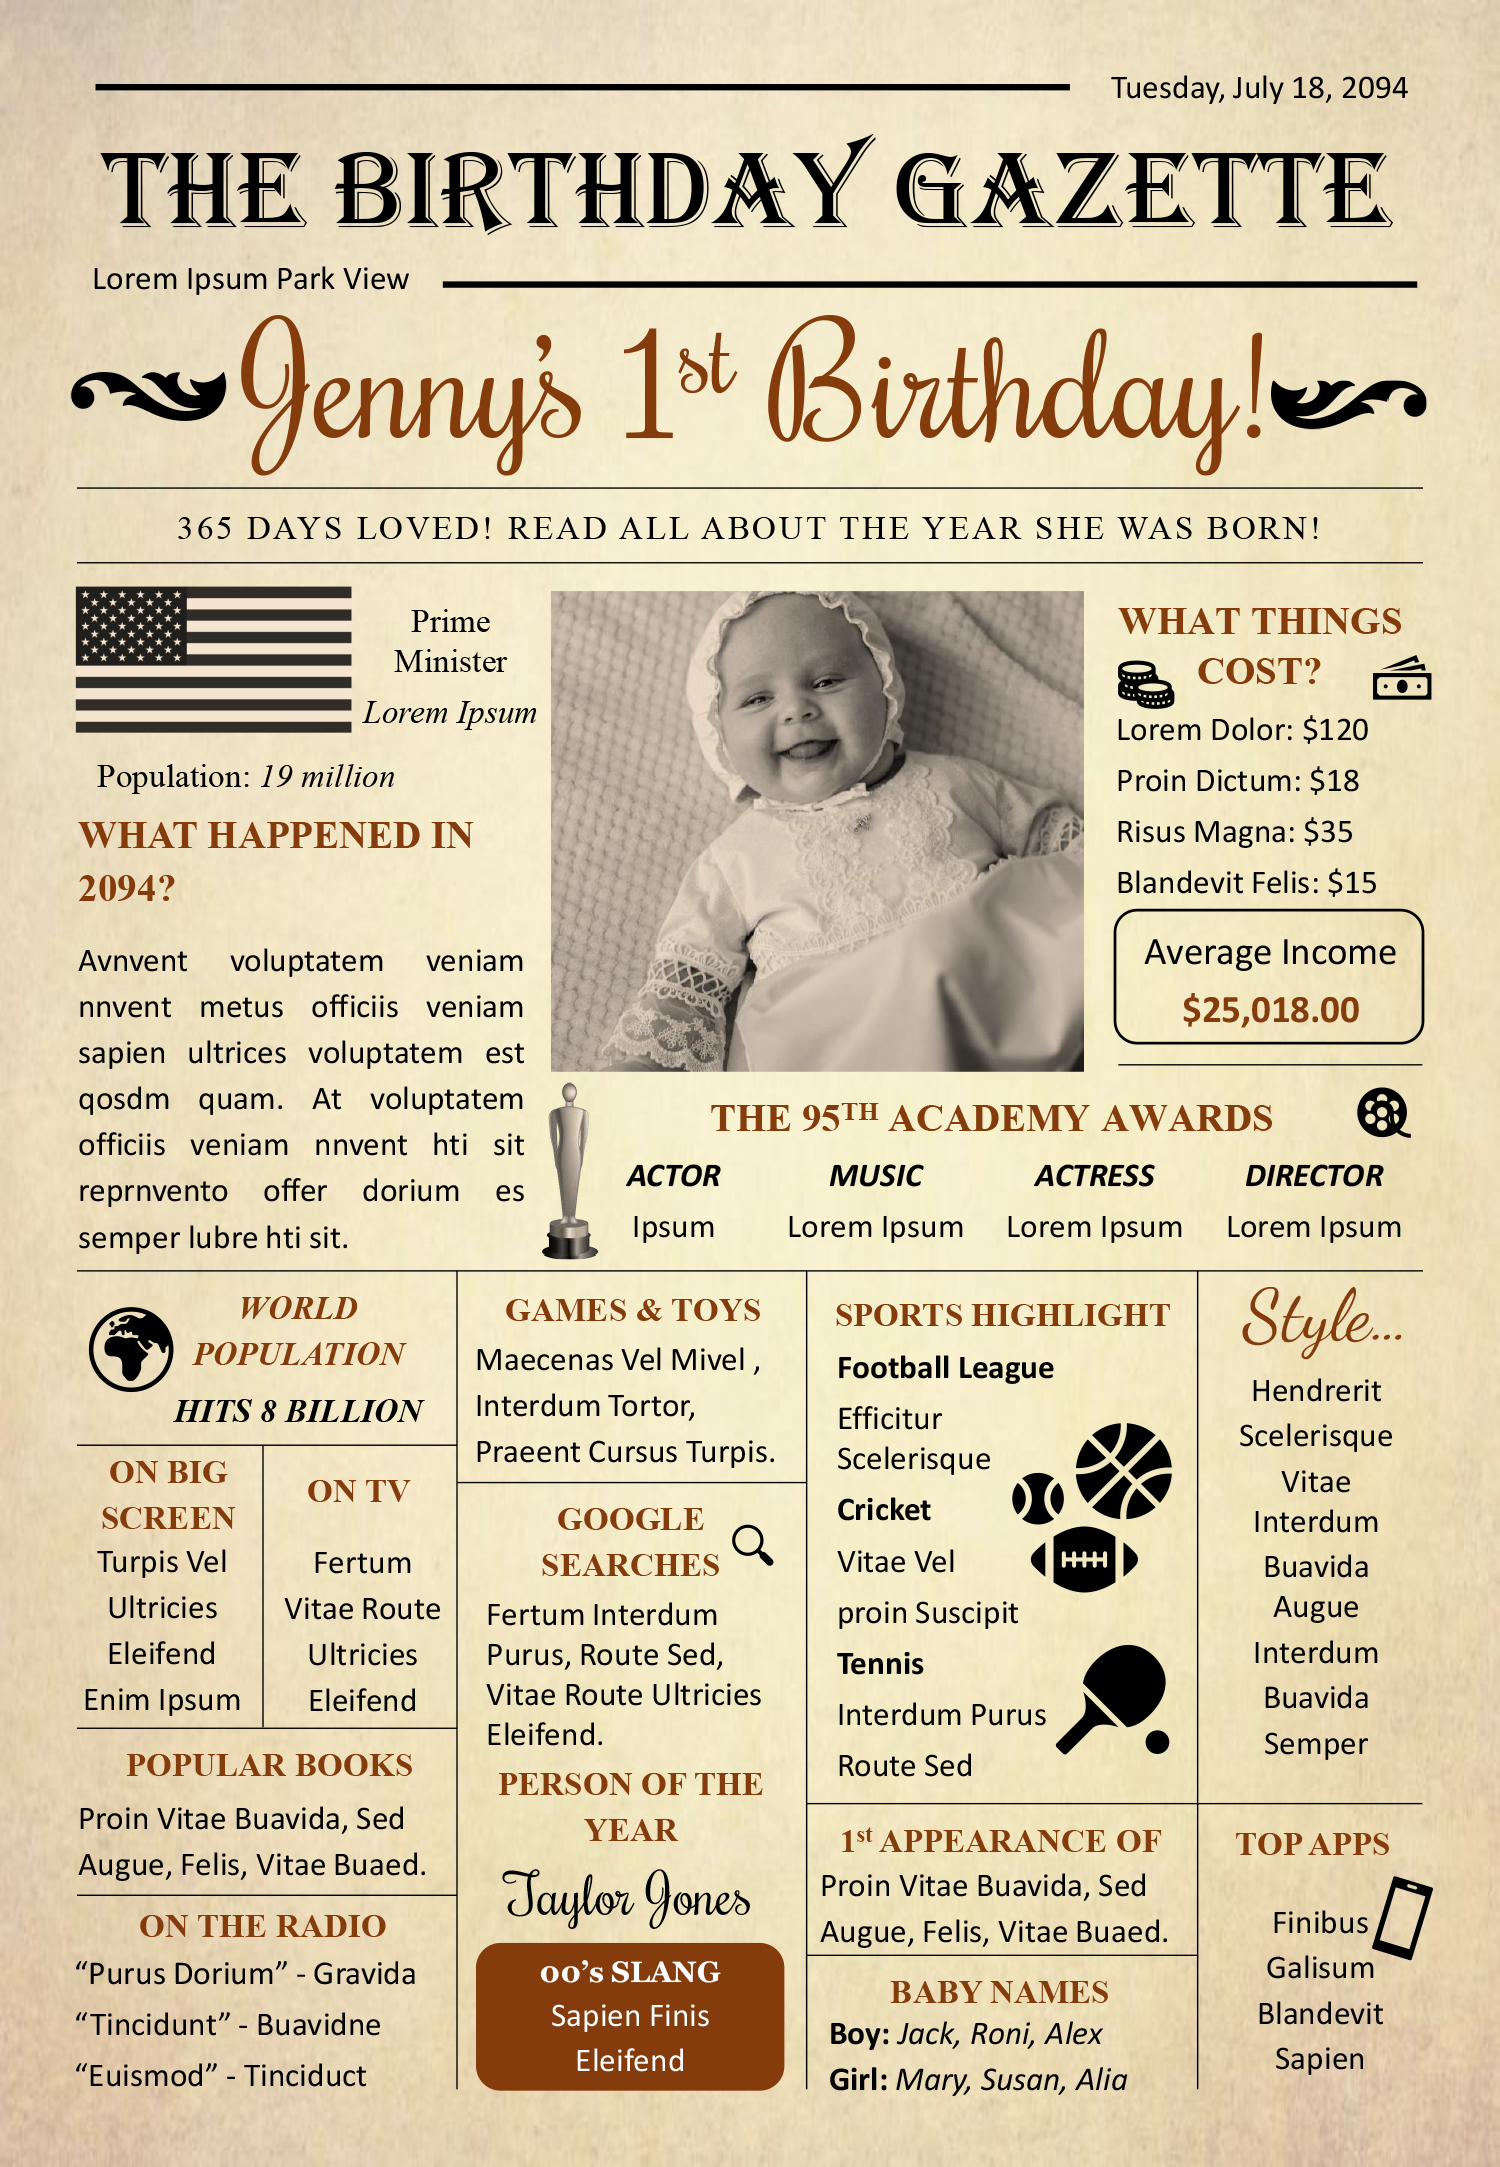 1st Birthday Vintage Style Newspaper Template - Front Page